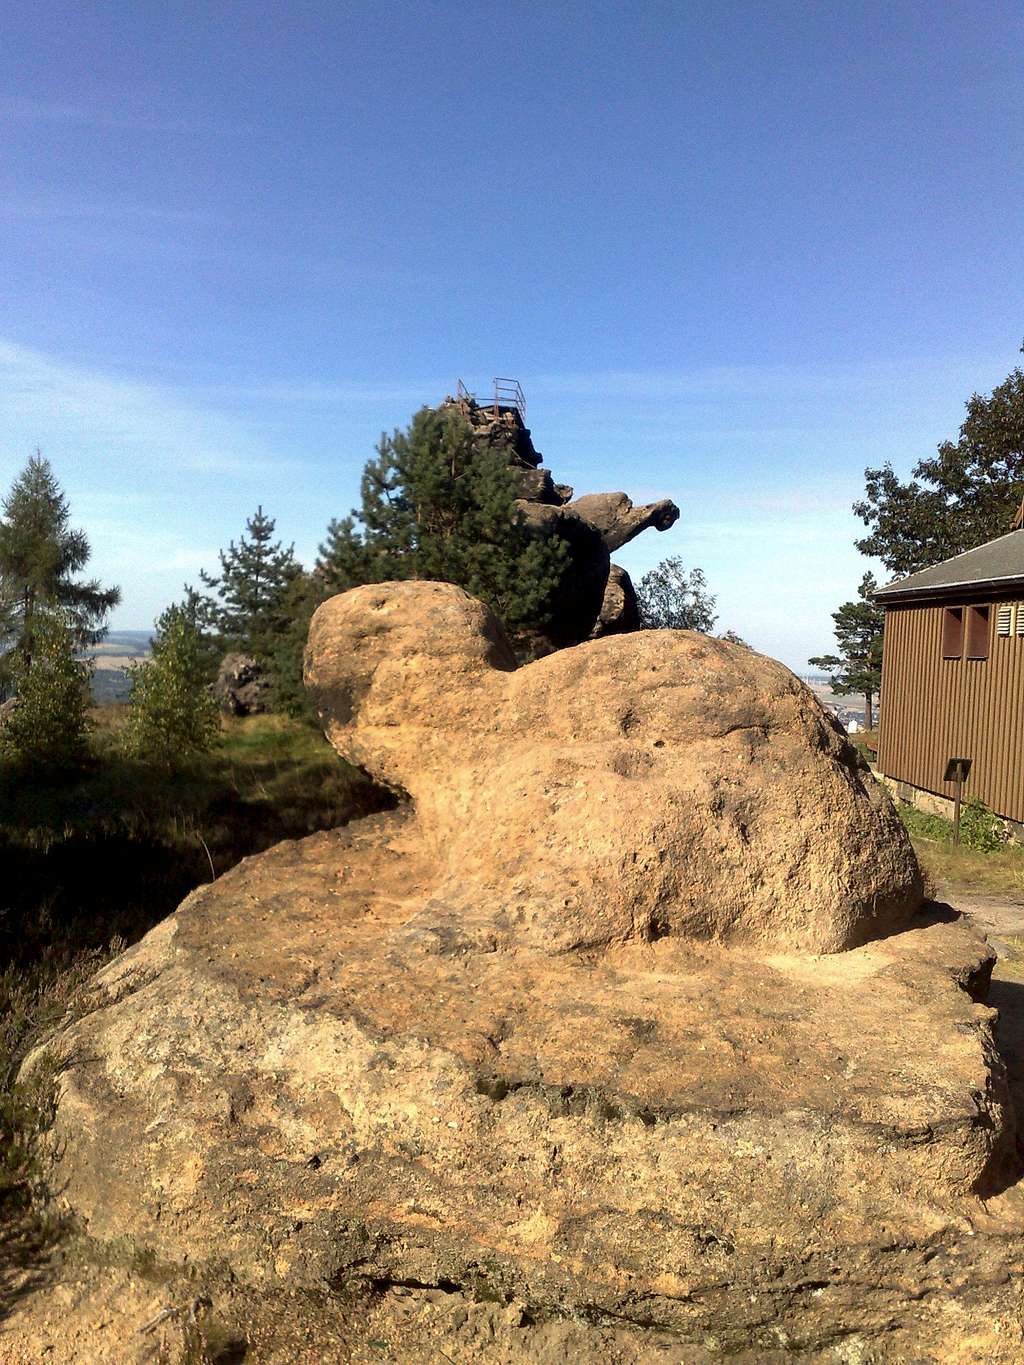 Turtle and Parrot (or Dinosaur) on Töpfer, Zittau mountains